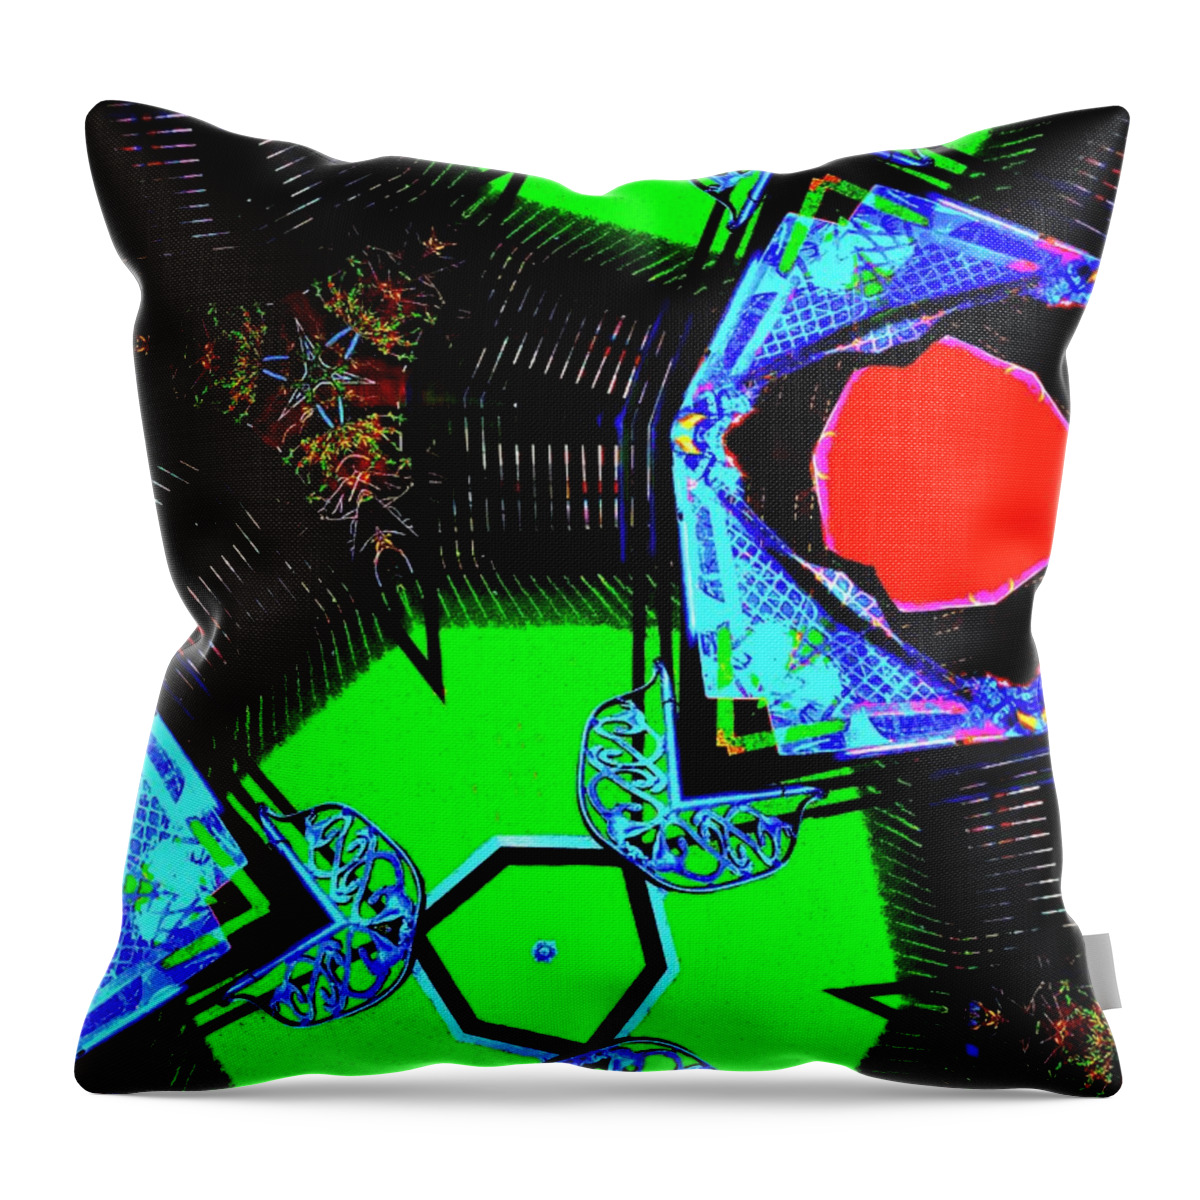 Led Lsd Euphoric Euphoria Lights Psychedelic Throw Pillow featuring the digital art Have a LED LSD Holiday by Glenn Hernandez